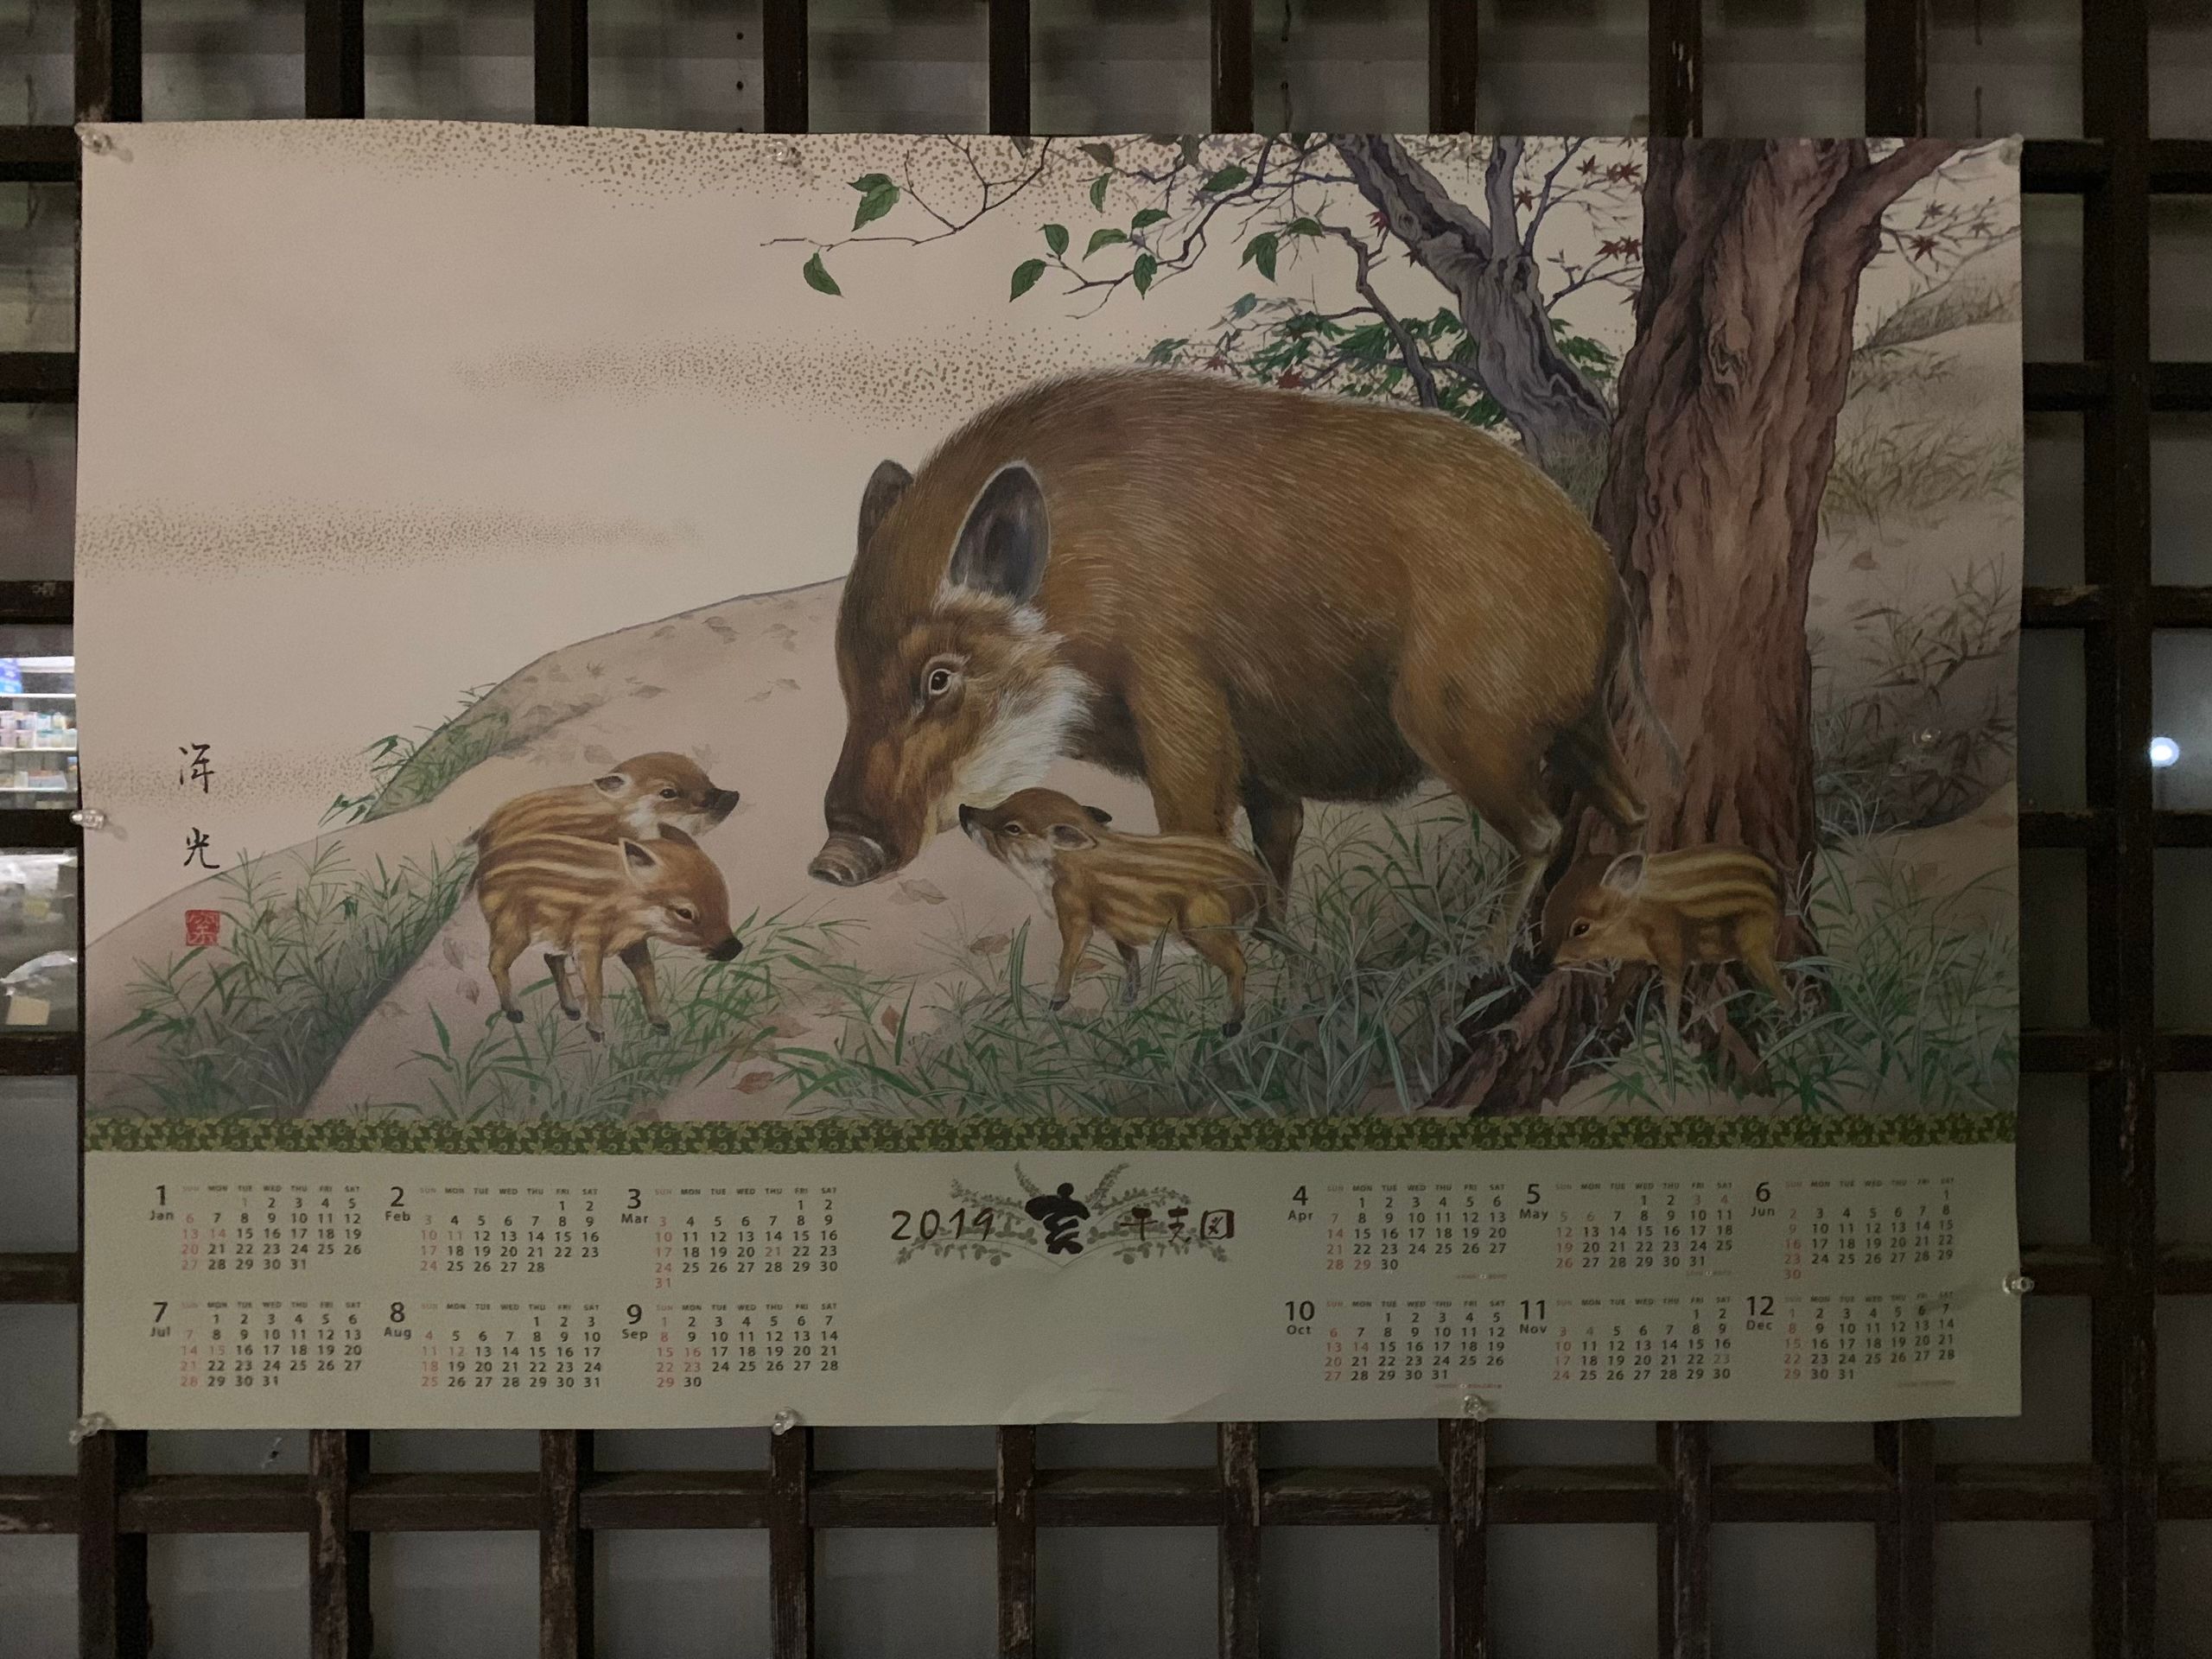 A 2019 wall calendar with a painting of a wild boar and three piglets.